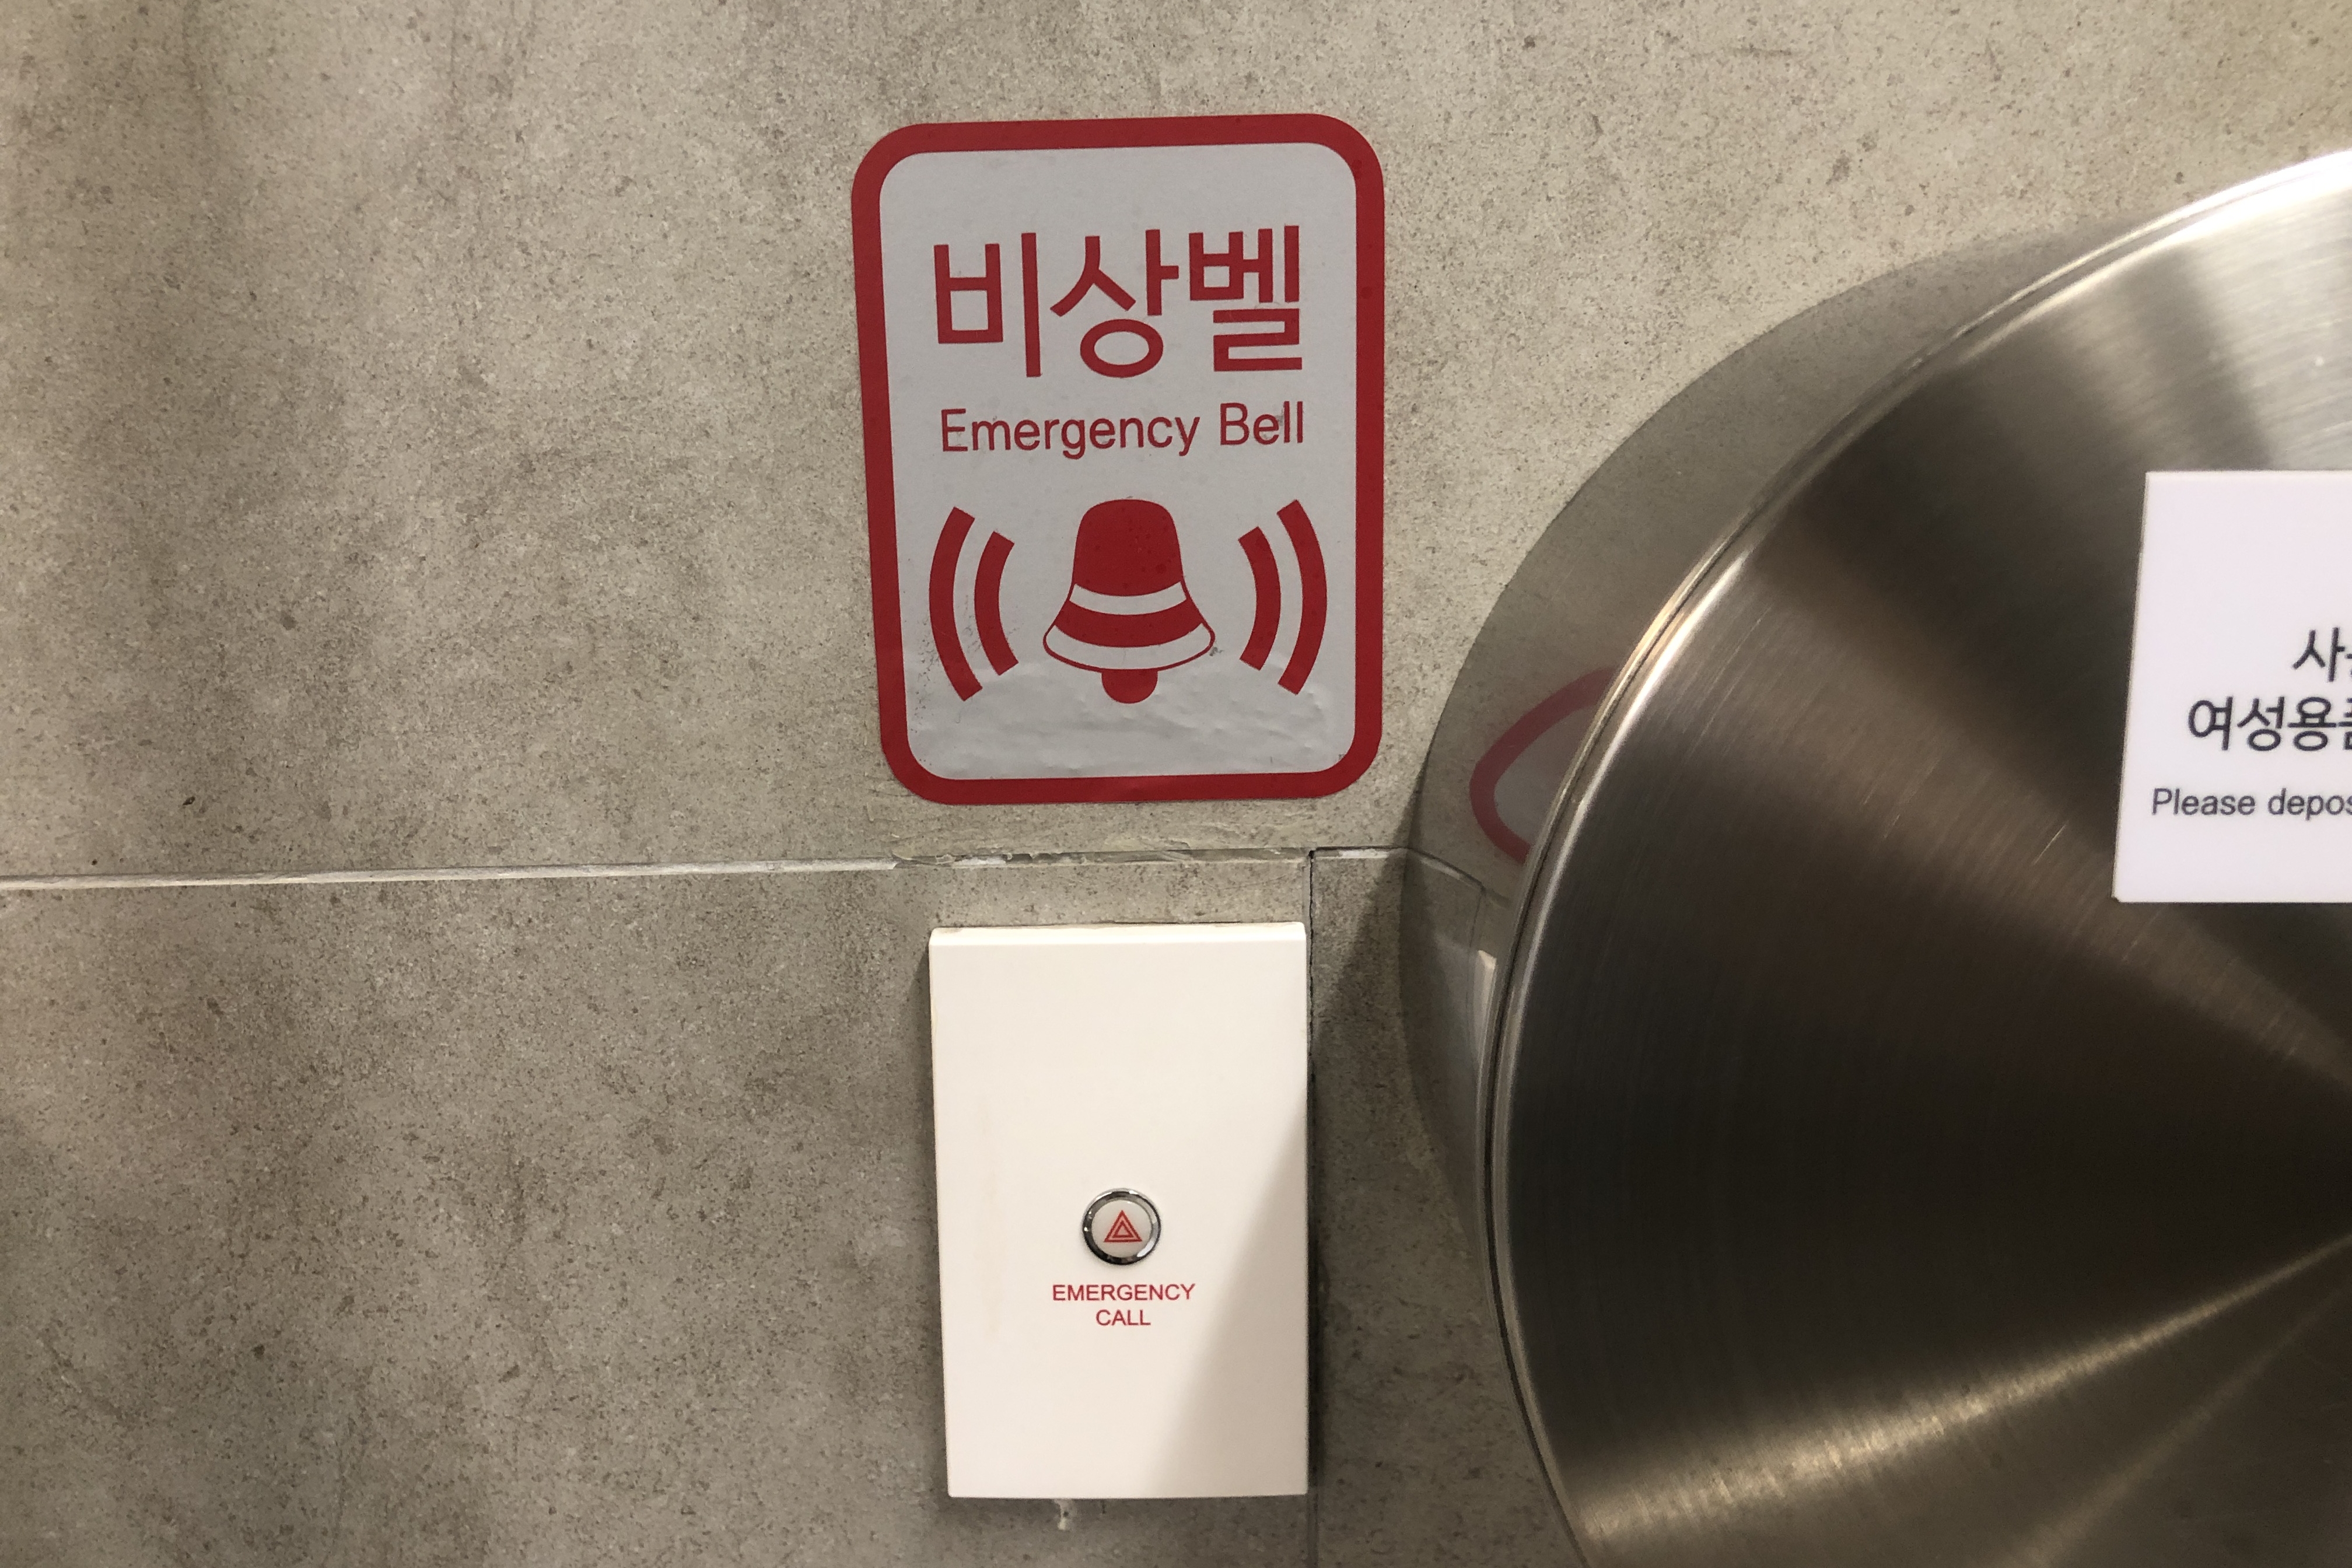 Accessible restroom for persons with disabilities0 : An emergency bell in accessible restroom
